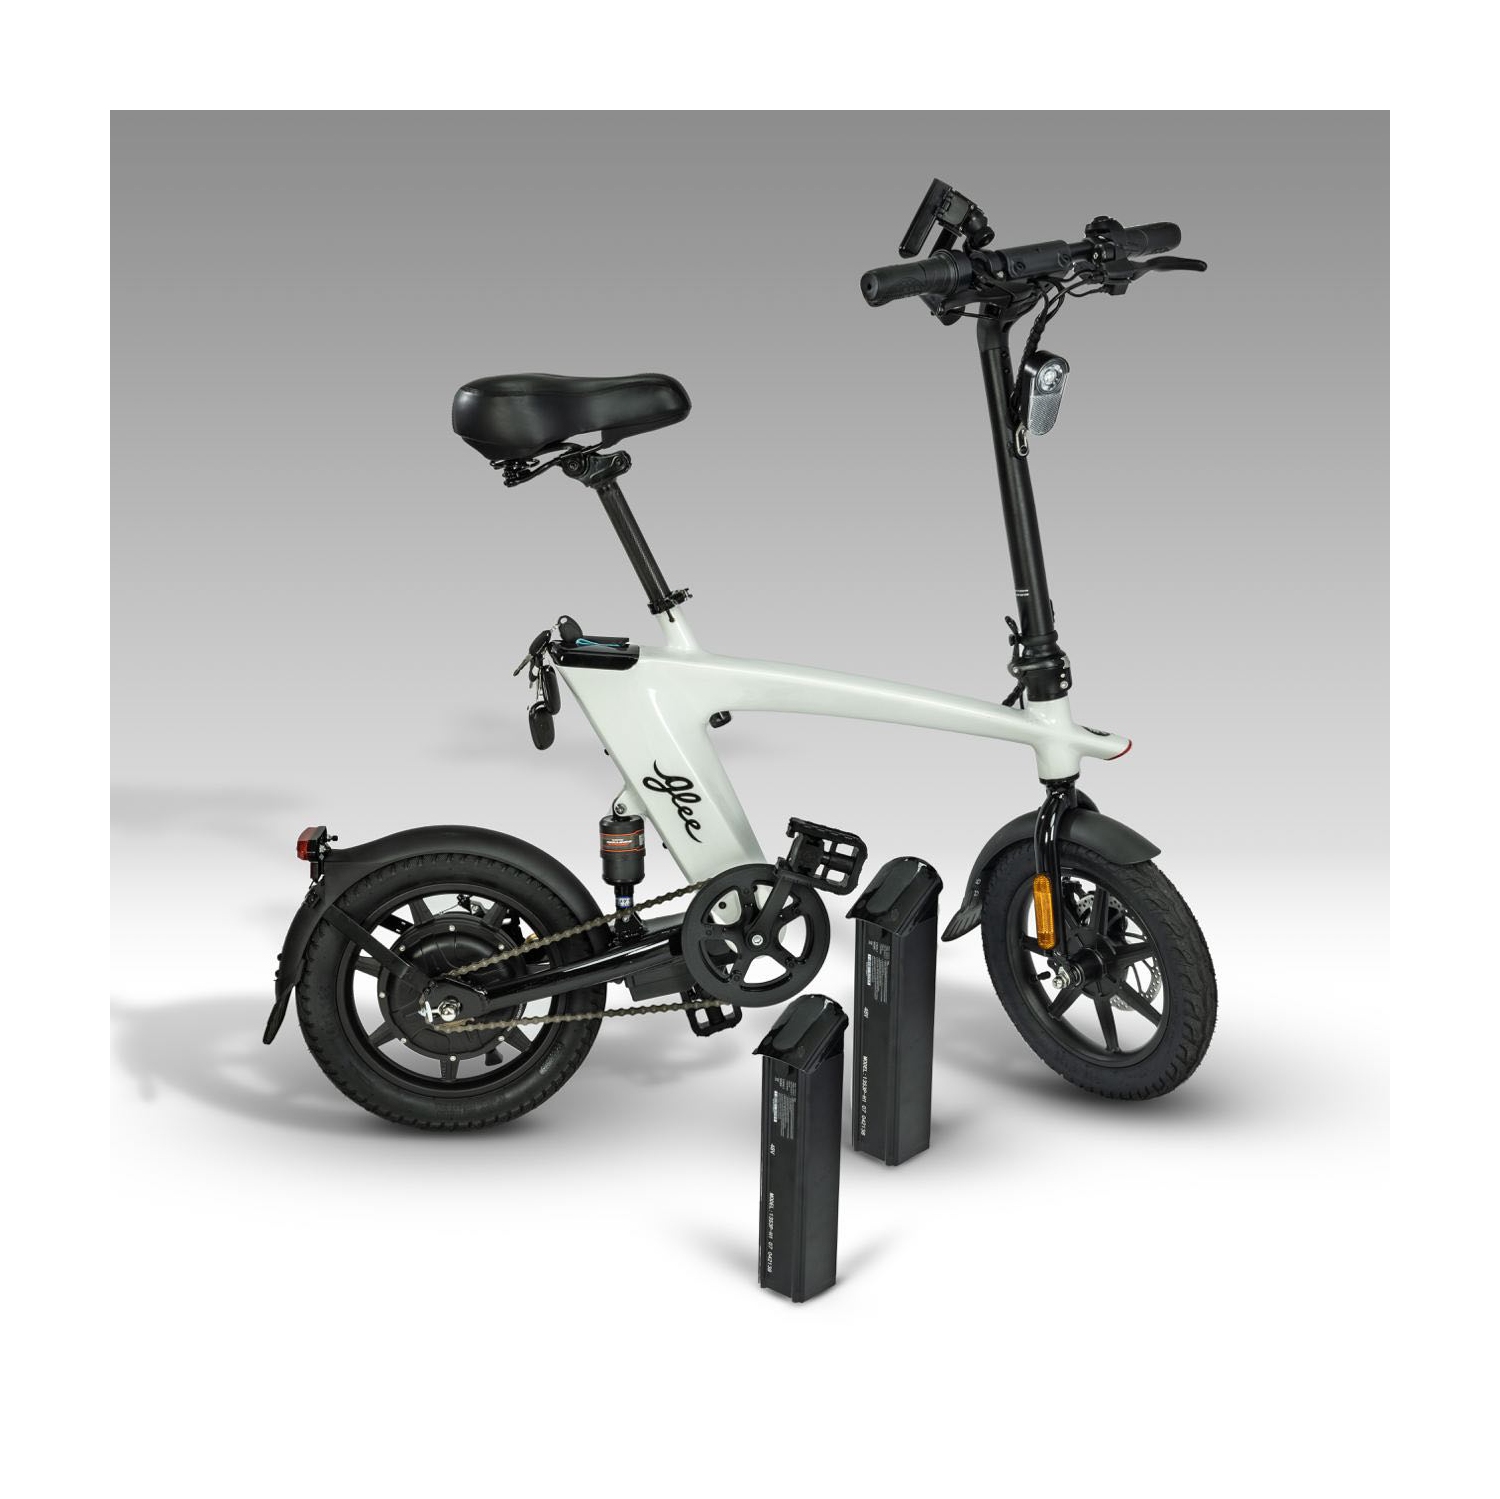 Glee eBikes Super Deal 48v 7.5ah Swappable Batteries 75km x 2 = 150 km /400w/32kmh Top Speed/3 Cycling Modes/+ Electronic In-frame Anti Theft / Electronic Stop and Start Controlled by FOB's (White)